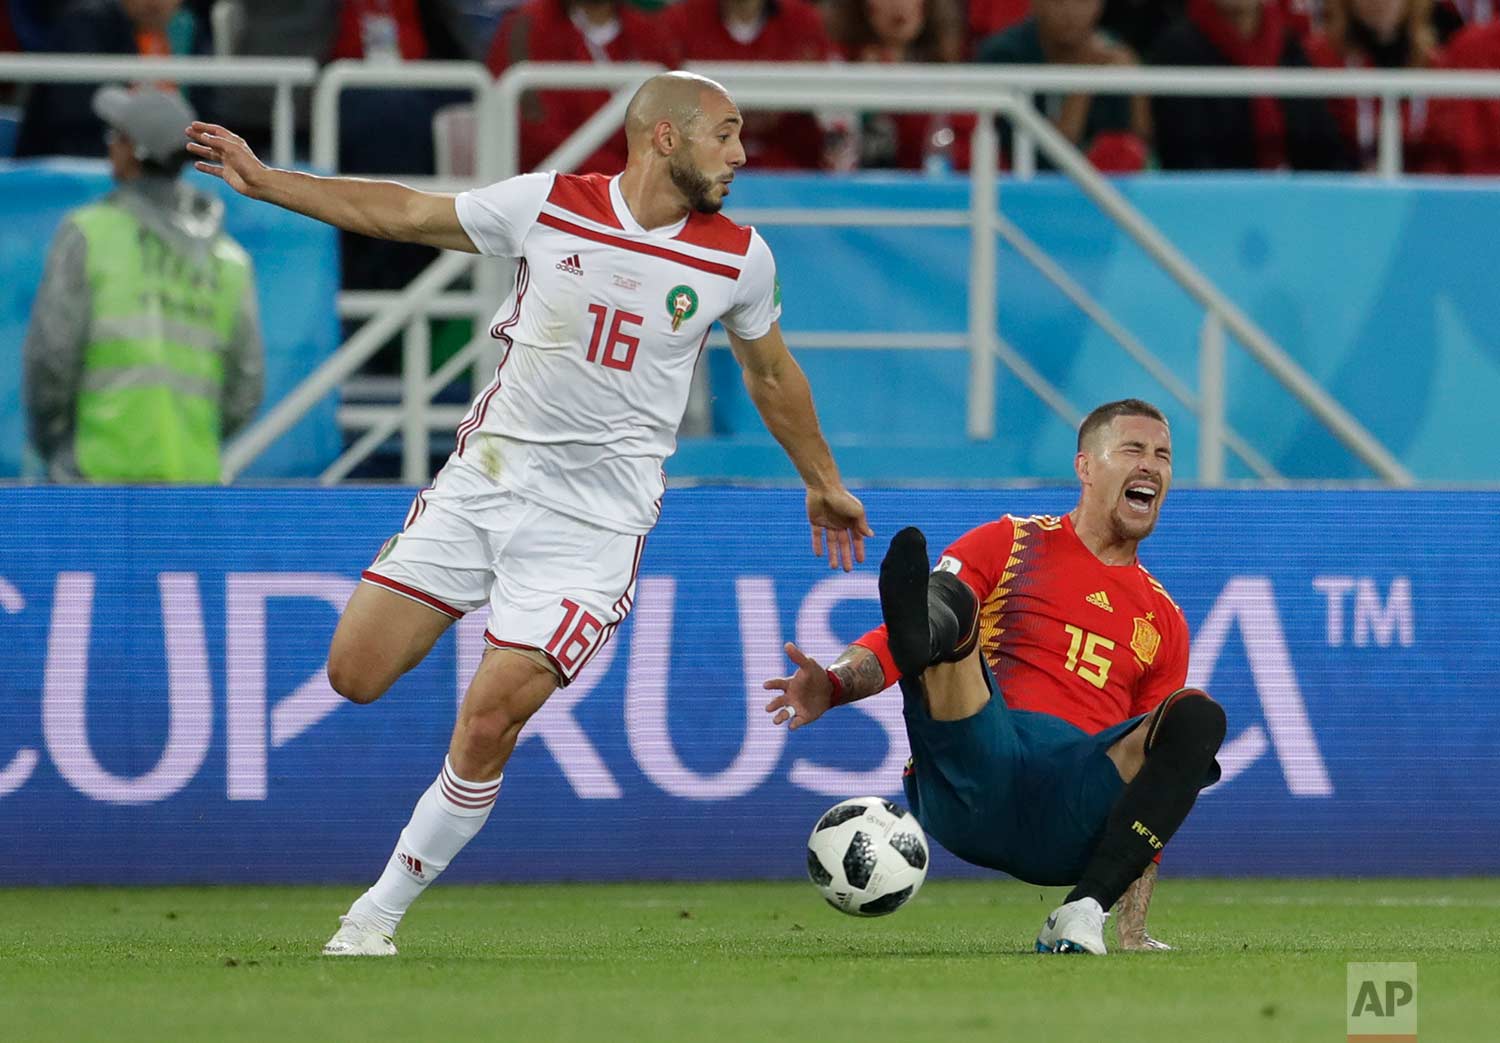  Spain's Sergio Ramos, right falls, loosing his shoe after a tackle by Morocco's Noureddine Amrabat, left, during the group B match between Spain and Morocco at the 2018 soccer World Cup at the Kaliningrad Stadium in Kaliningrad, Russia, Monday, June